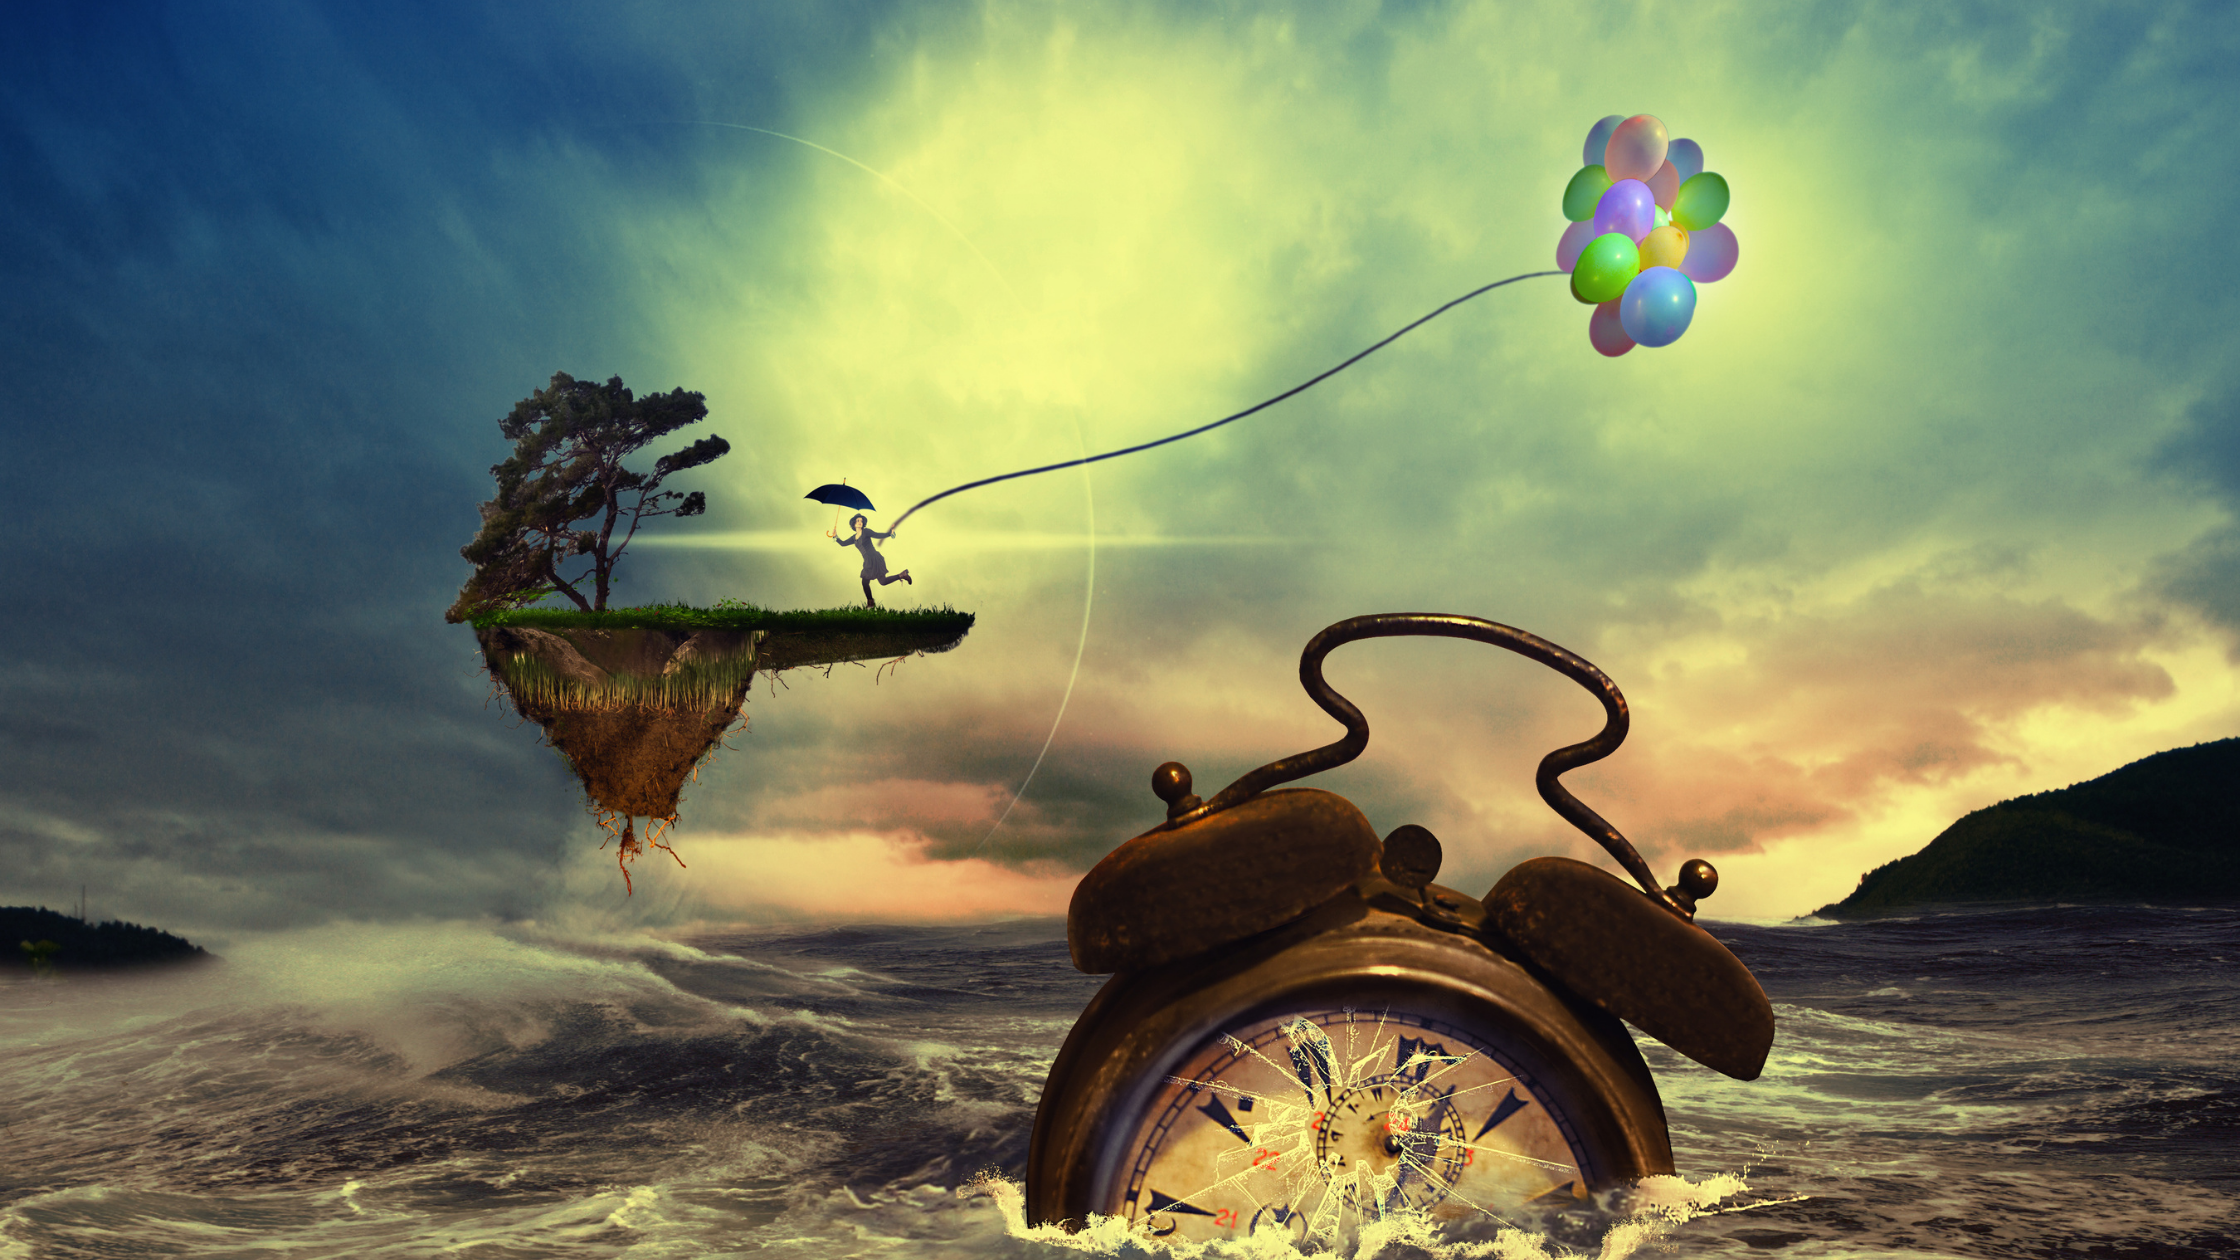 Whimsical illustration of a person on a small floating chunk of landed suspended in the air above the ocean, pulling colorful balloons behind them, an alarm clock in the foreground is half-submerged in the water